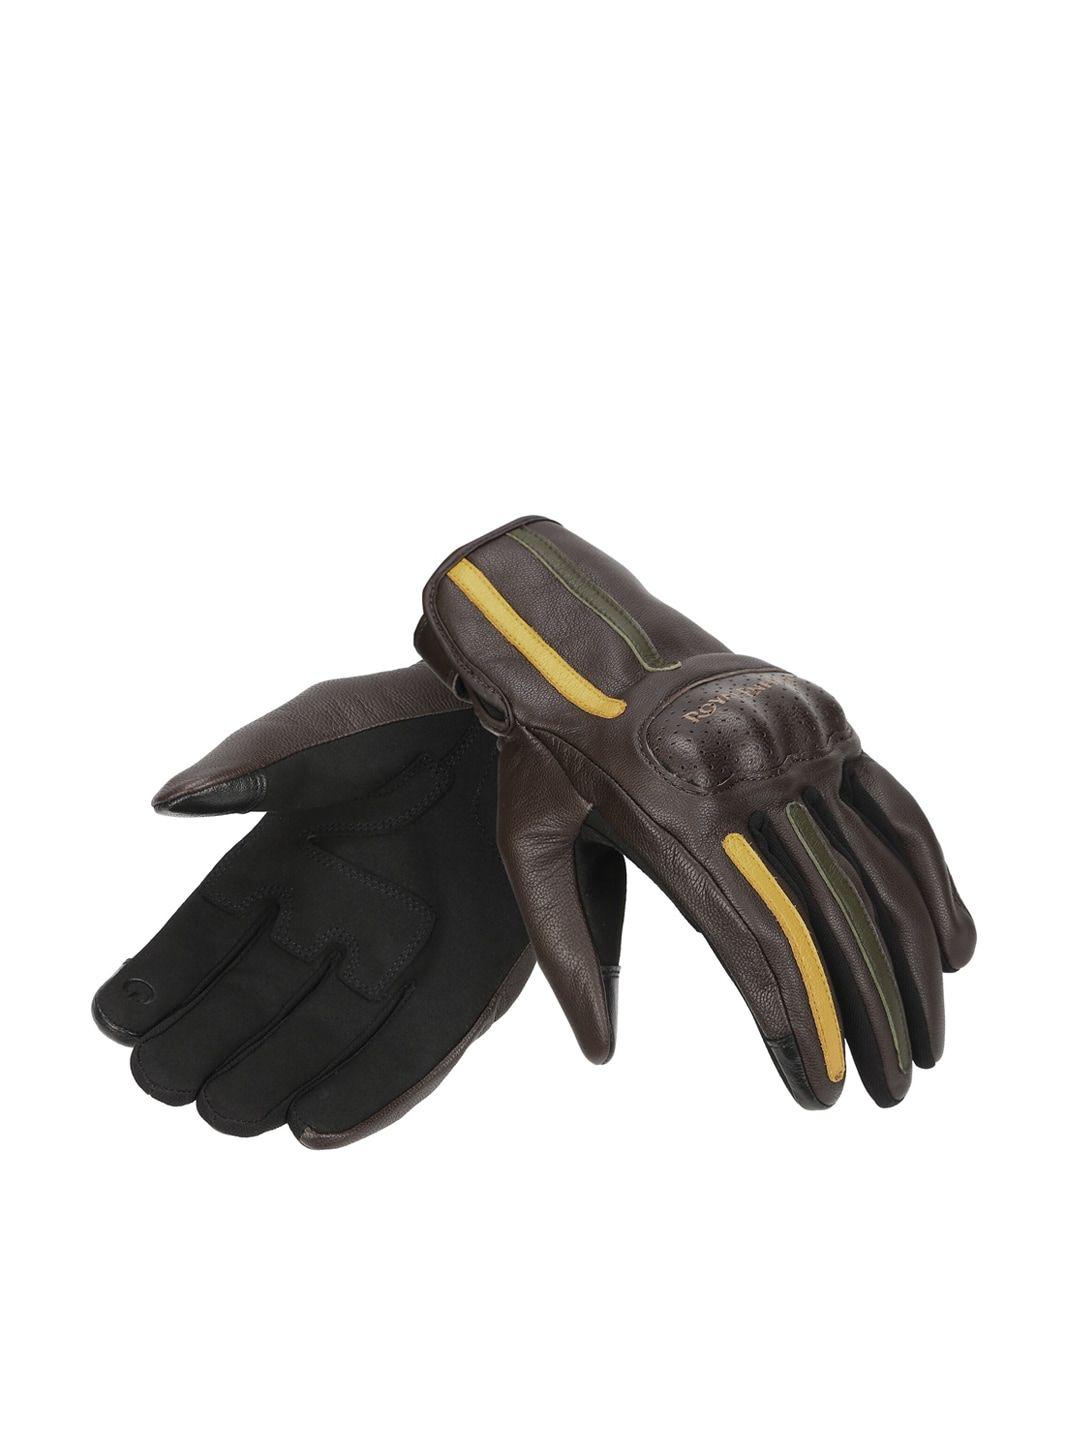 royal enfield men brown & olive green gritty leather riding gloves